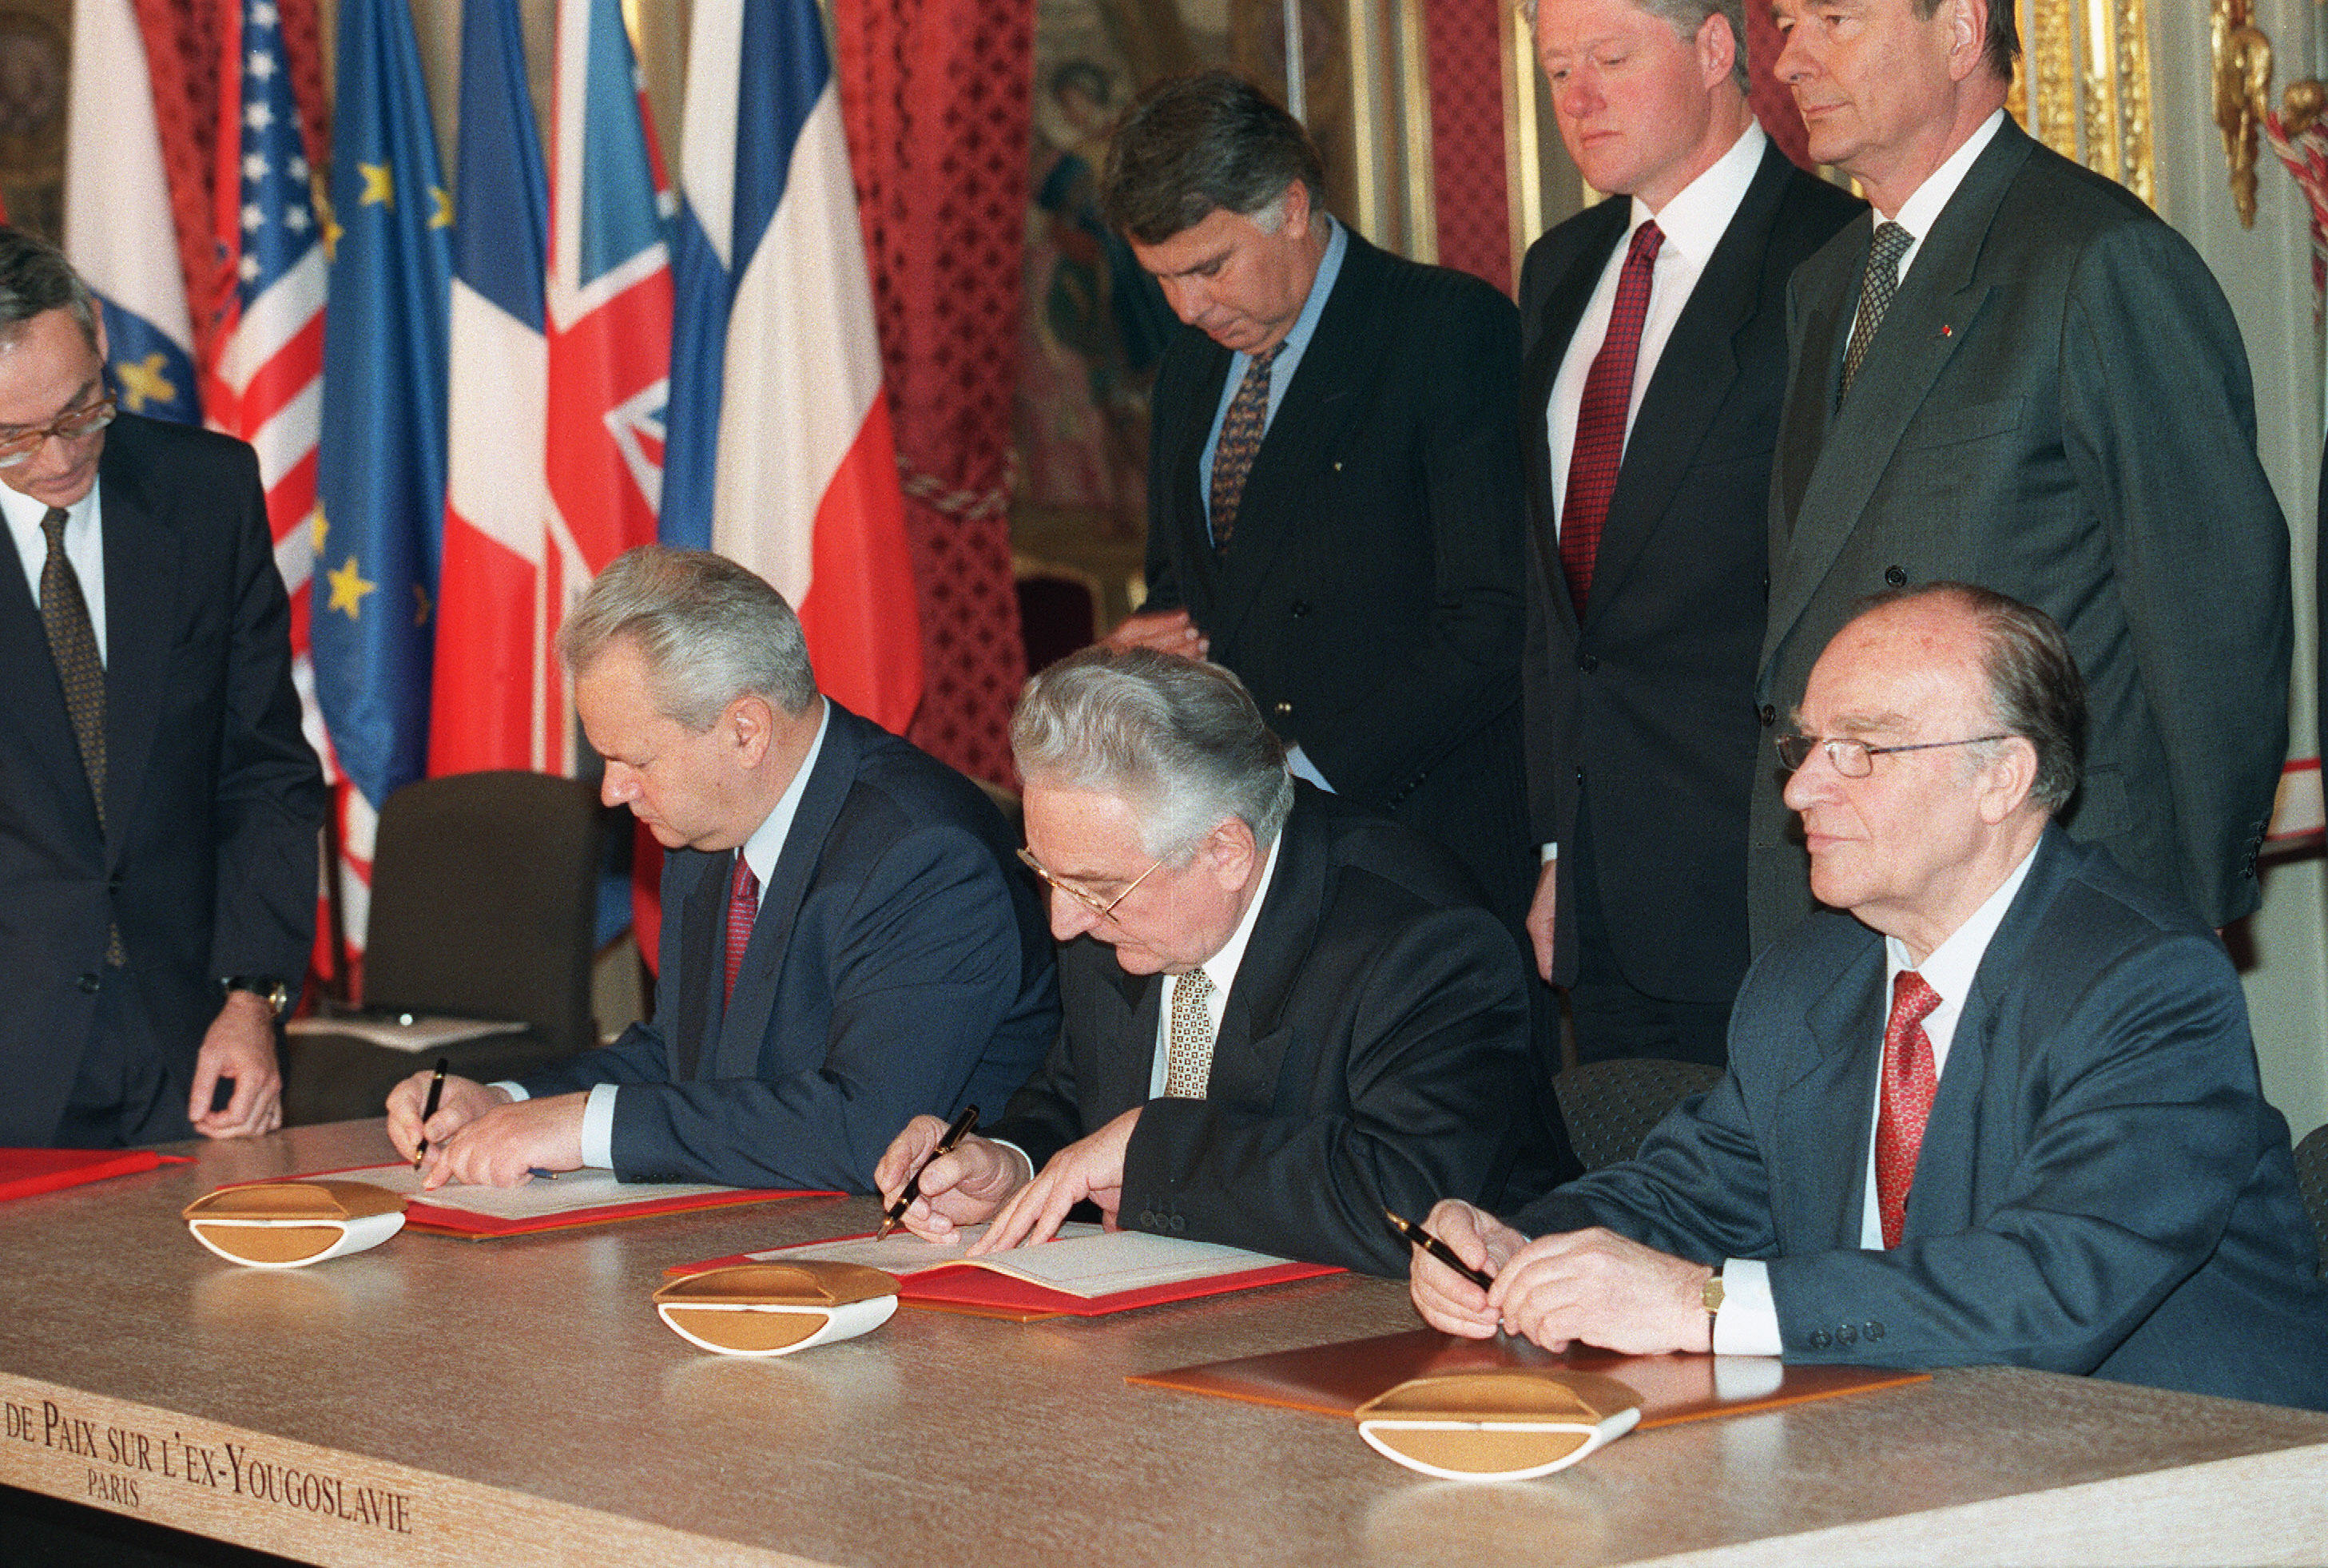 Paris, FRANCE: (FILES) This file picture taken 14 December 2005 at the Elysee Palace in Paris shows (1st Row L to R) Serbian president Slobodan Milosevic, Bosnian President Alija Izetbegovic (C) and Croatian President Franjo Tudjman signing the Dayton peace accord on Bosnia, as (2d row L to R) Spanish Prime Minister Felipe Gonzalez, US President Bill Clinton and French President Jacques Chirac look on. 14 December 2005 will mark the 10th anniversary of the signing of the Dayton peace agreement which ended more than three years of bloody inter-ethnic war and divided the country into a shaky system of separate but equal entities. AFP PHOTO/FILES/MICHEL GAGNE (Photo credit should read MICHEL GANGNE/AFP/Getty Images)